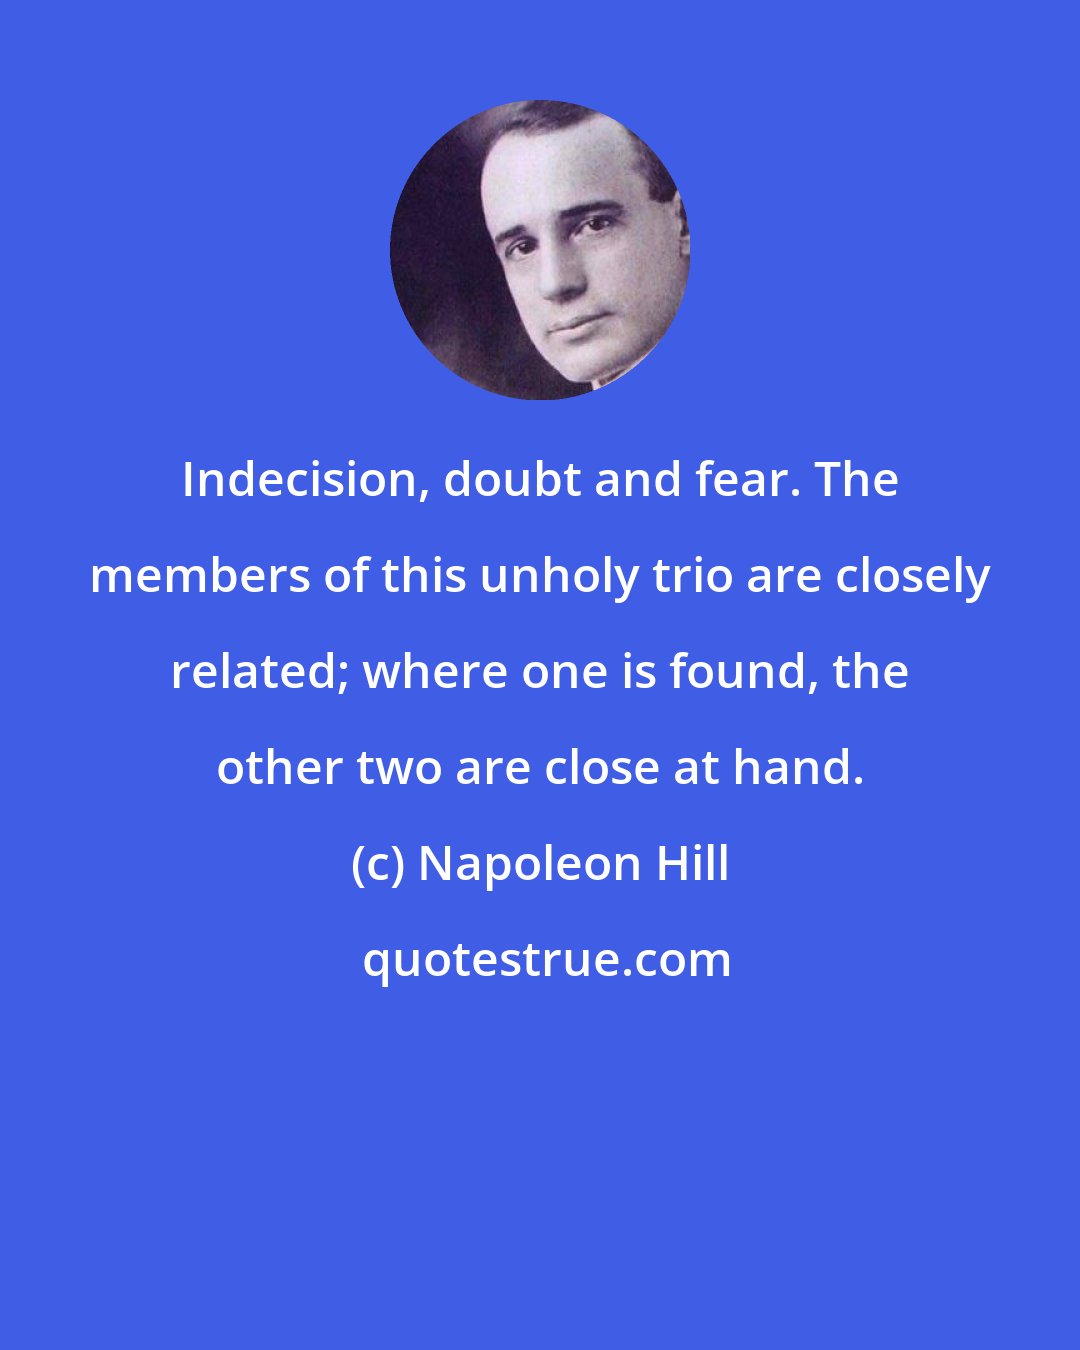 Napoleon Hill: Indecision, doubt and fear. The members of this unholy trio are closely related; where one is found, the other two are close at hand.